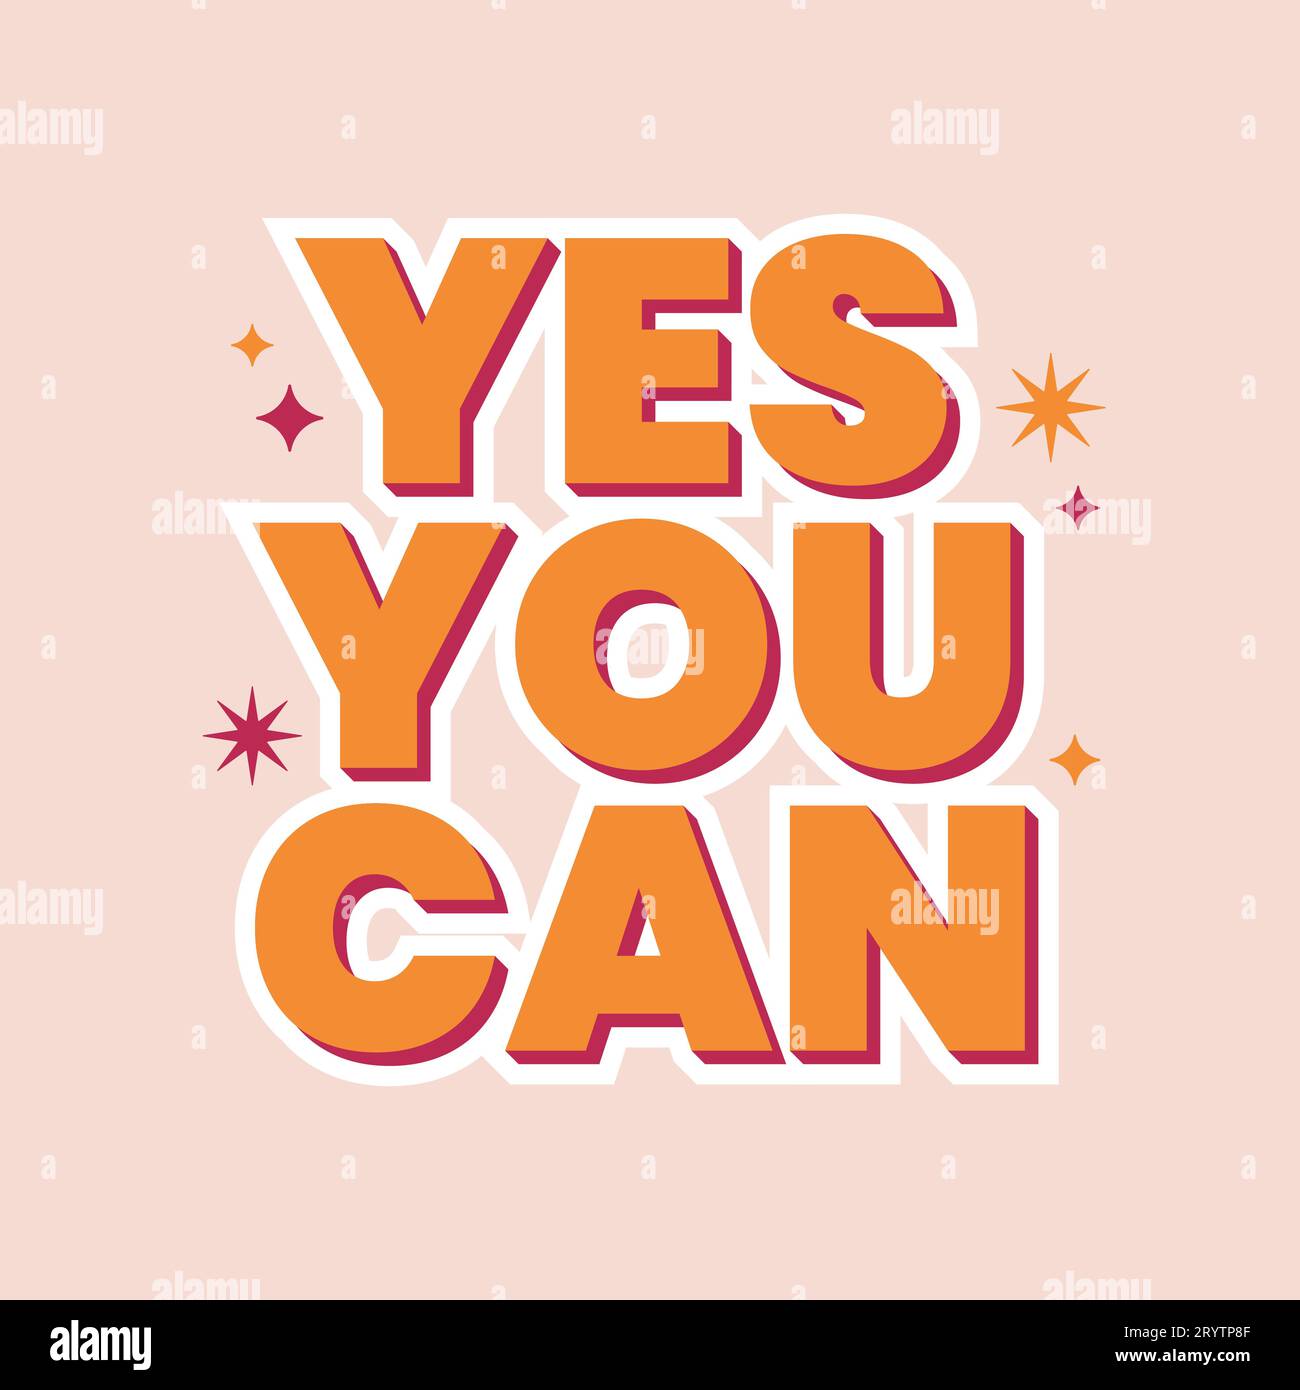 Yes you can quotes stock vector. Illustration of concept - 86574912